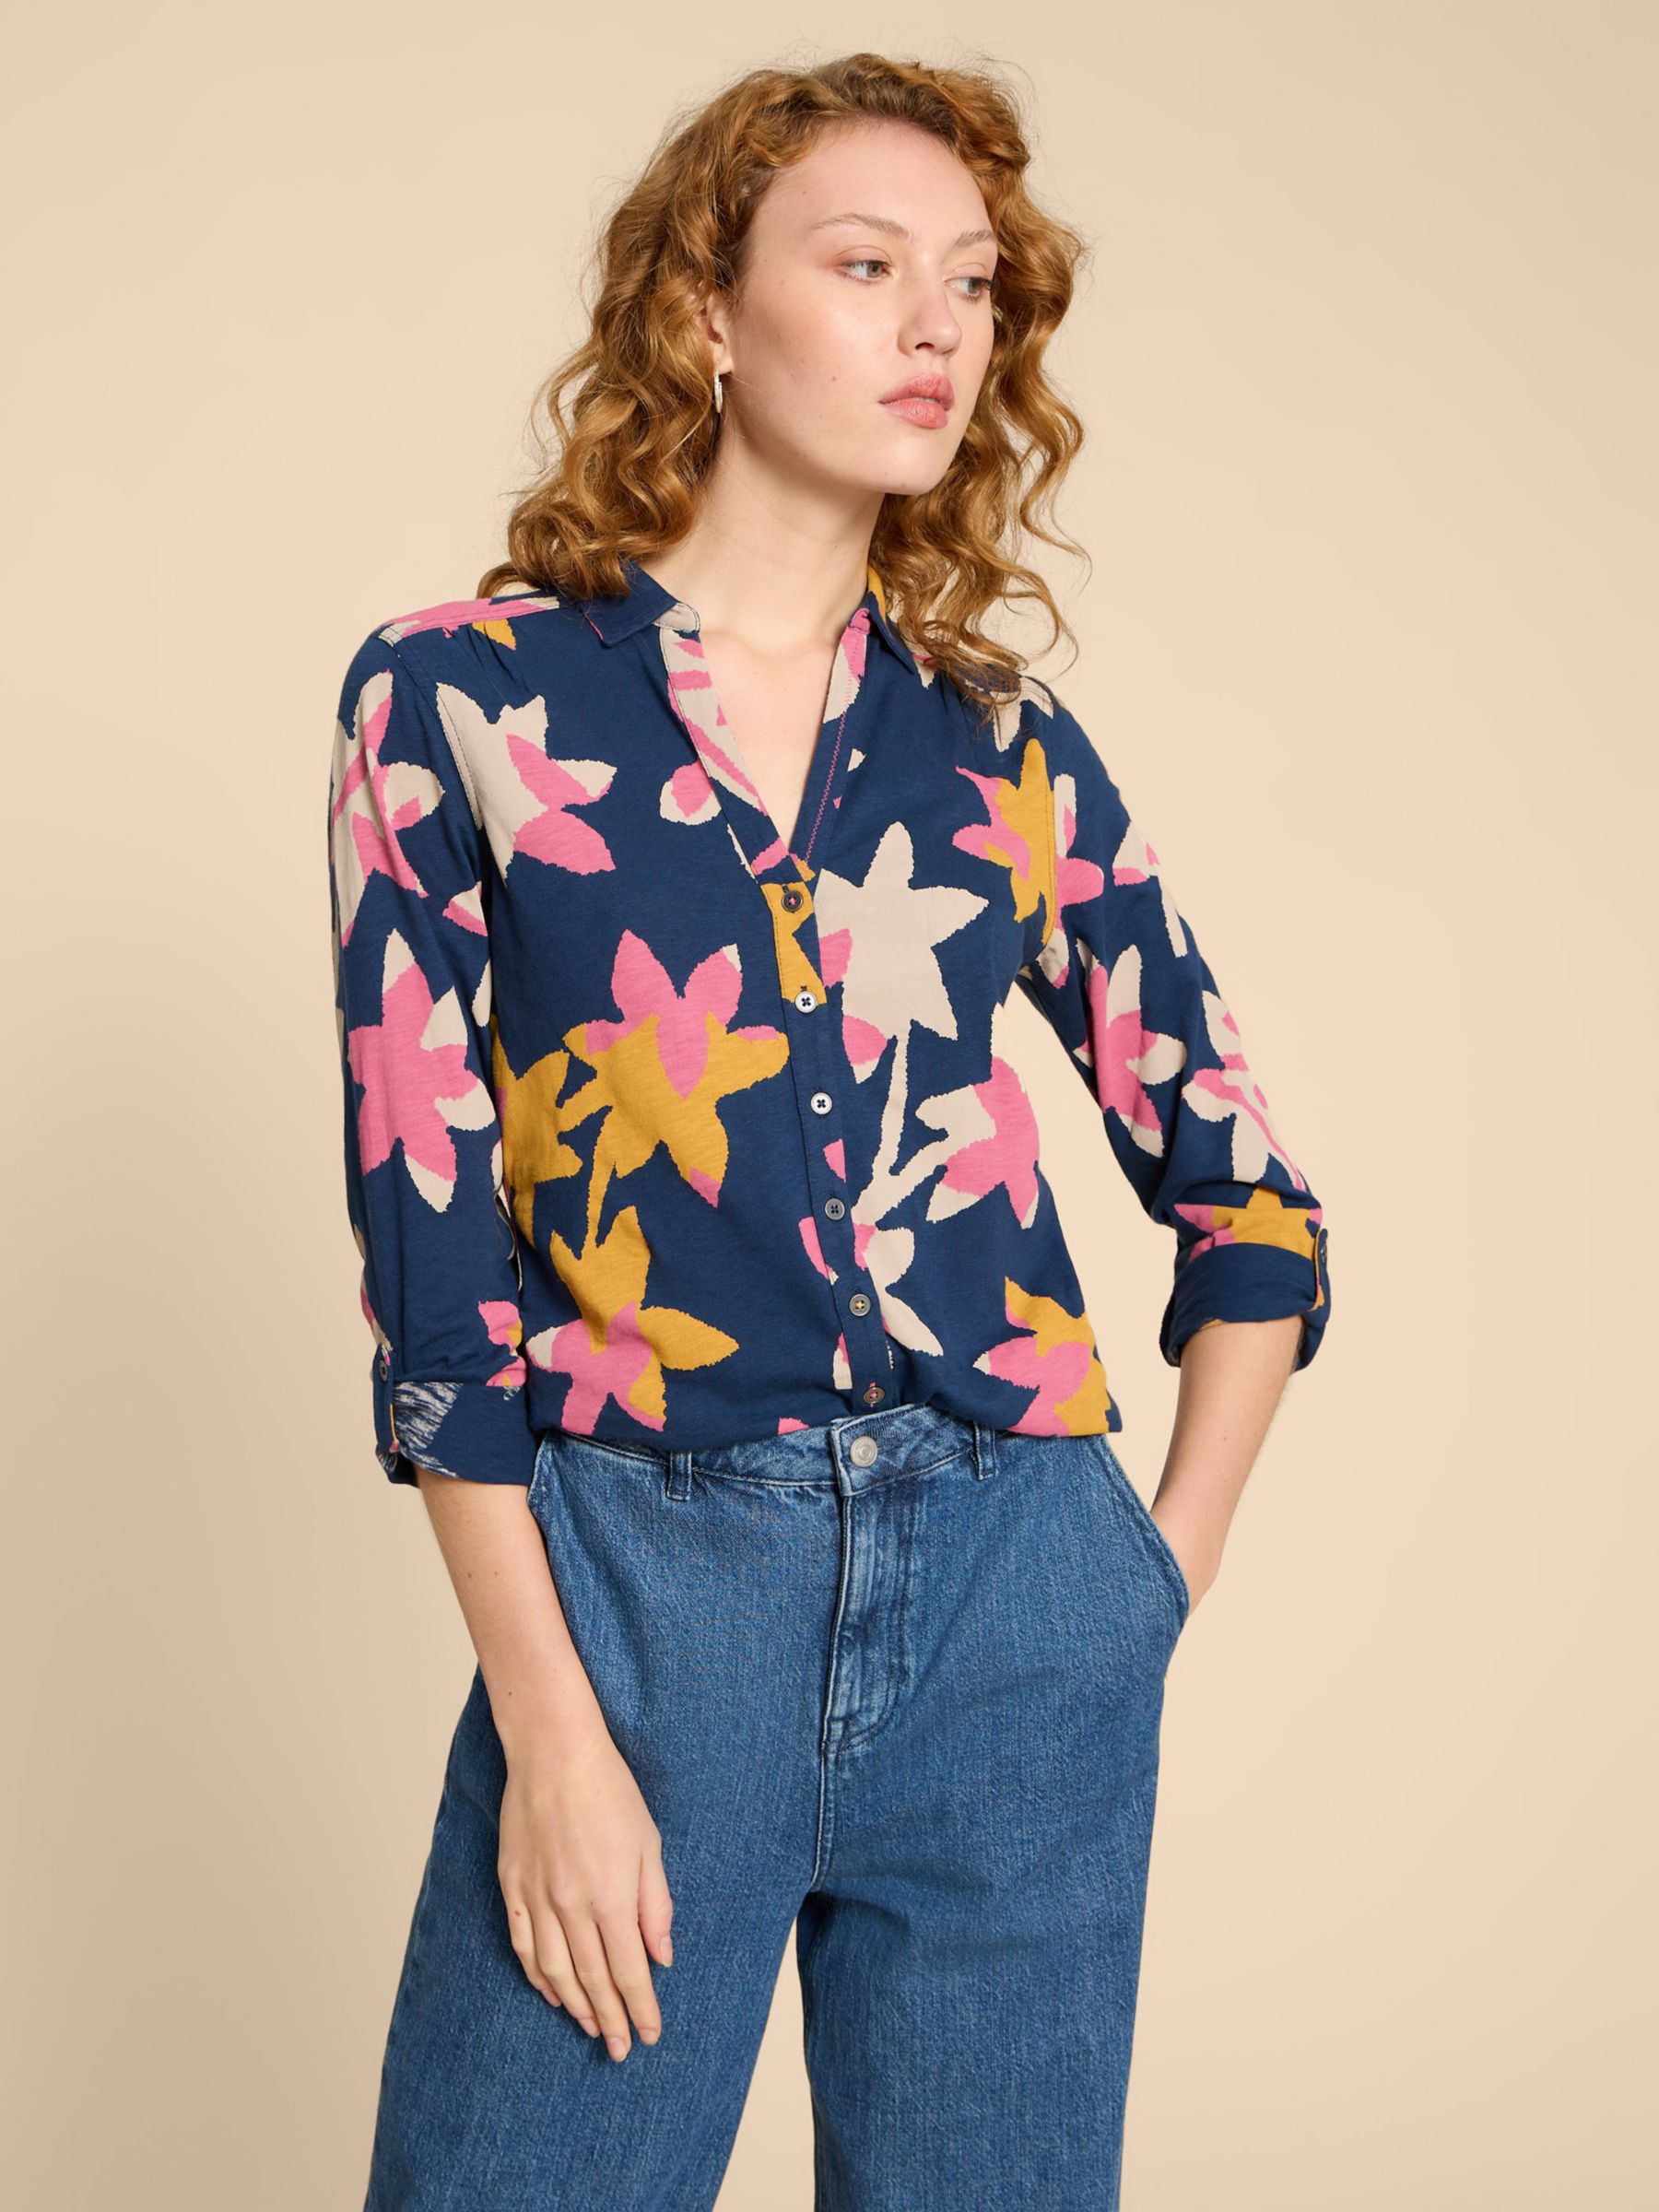 White Stuff Annie Floral Jersey Shirt, Navy/Multi at John Lewis & Partners